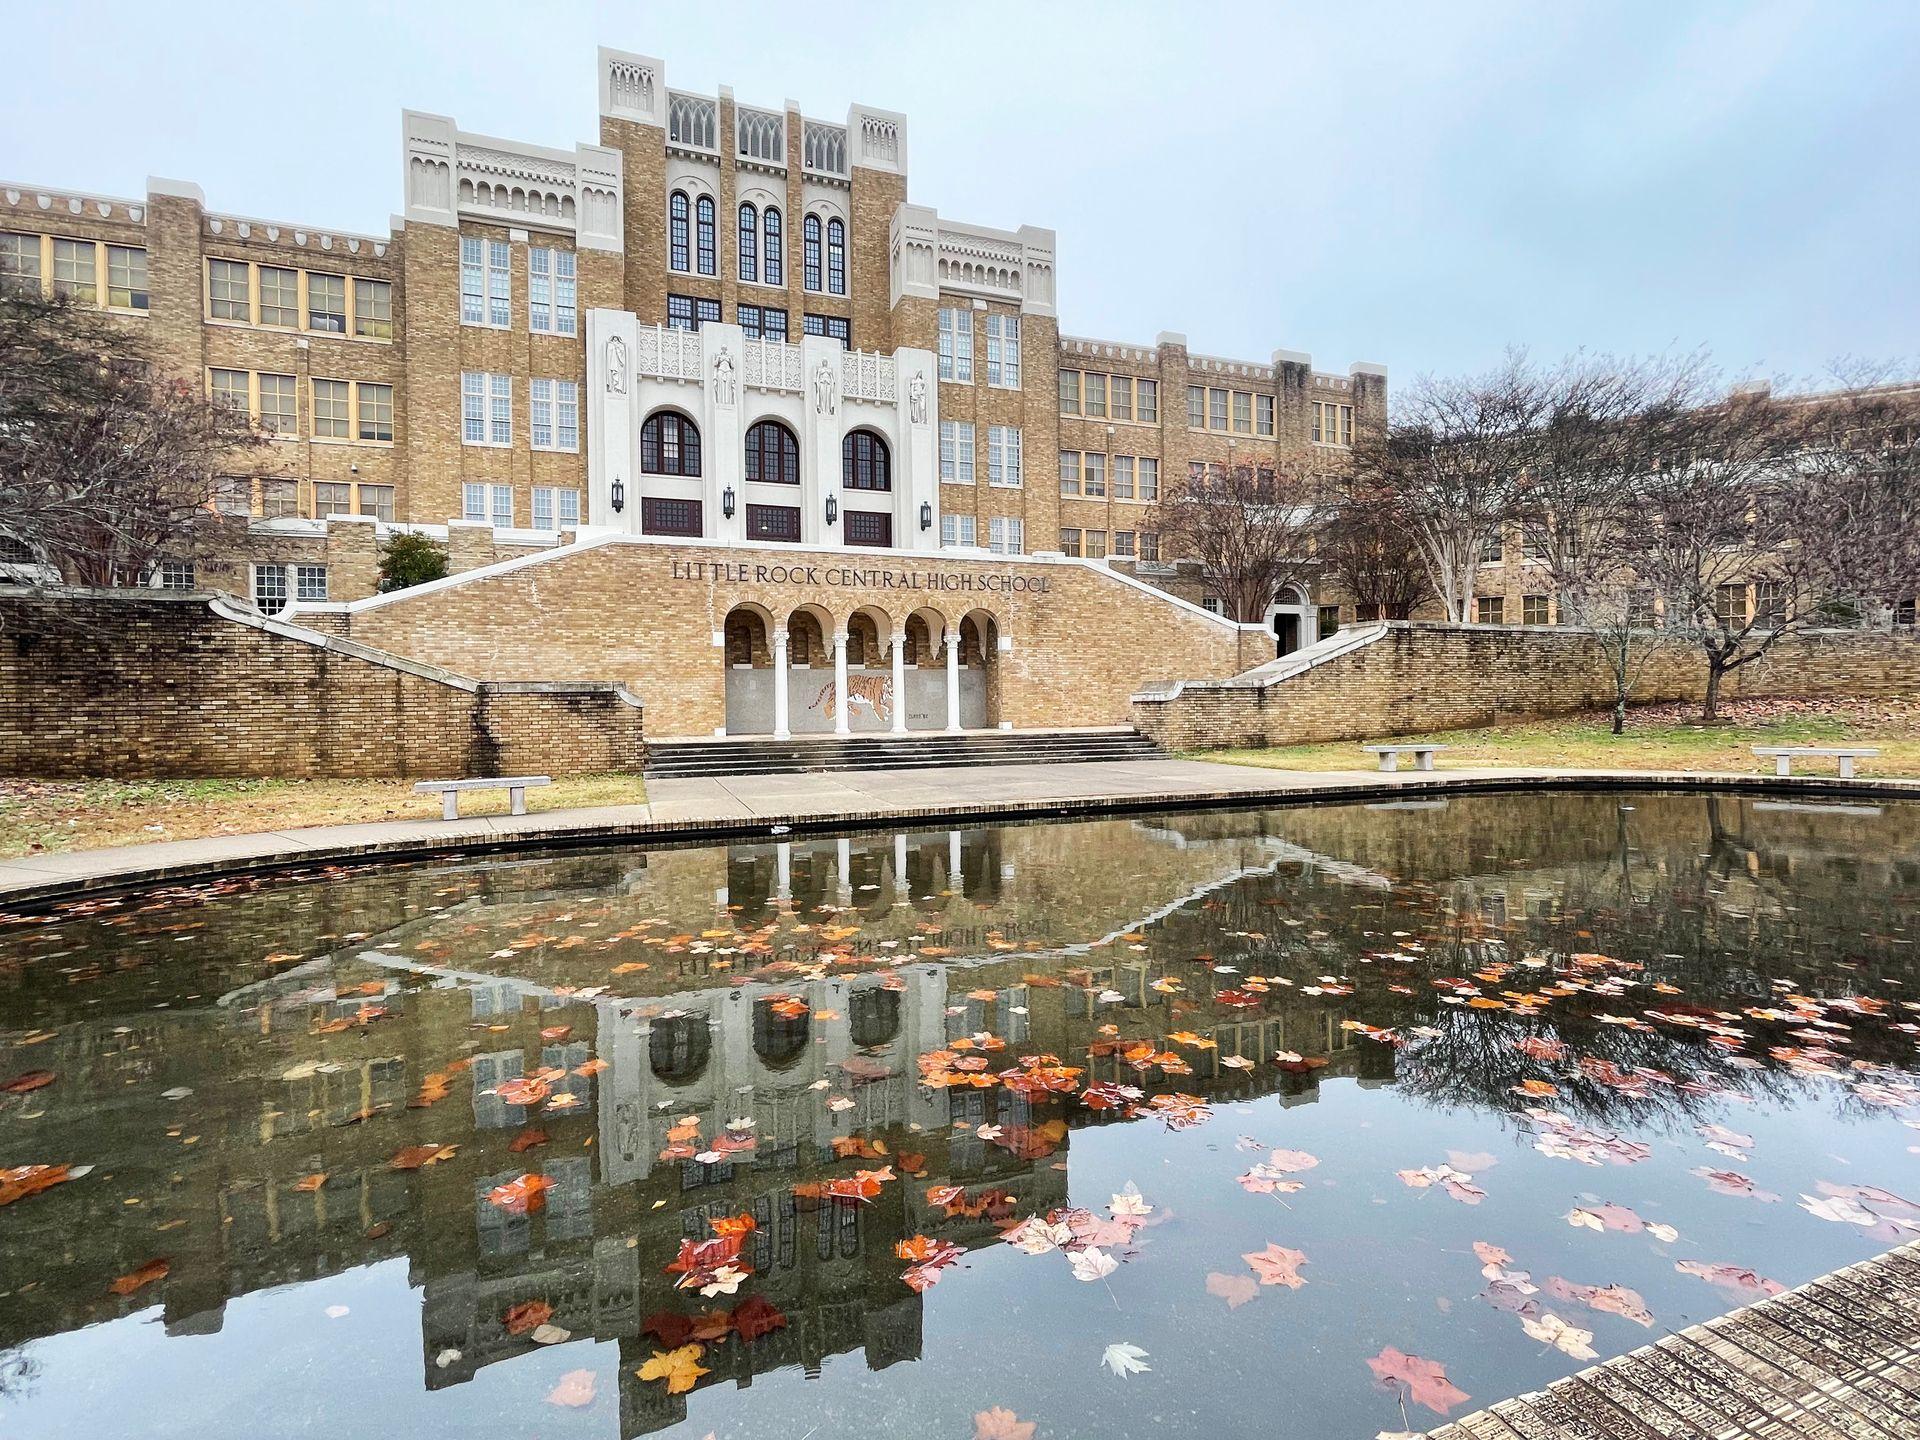 The exterior of Little Rock Central High School. The school reflects in a pool of water with some fall leaves floating in the water.